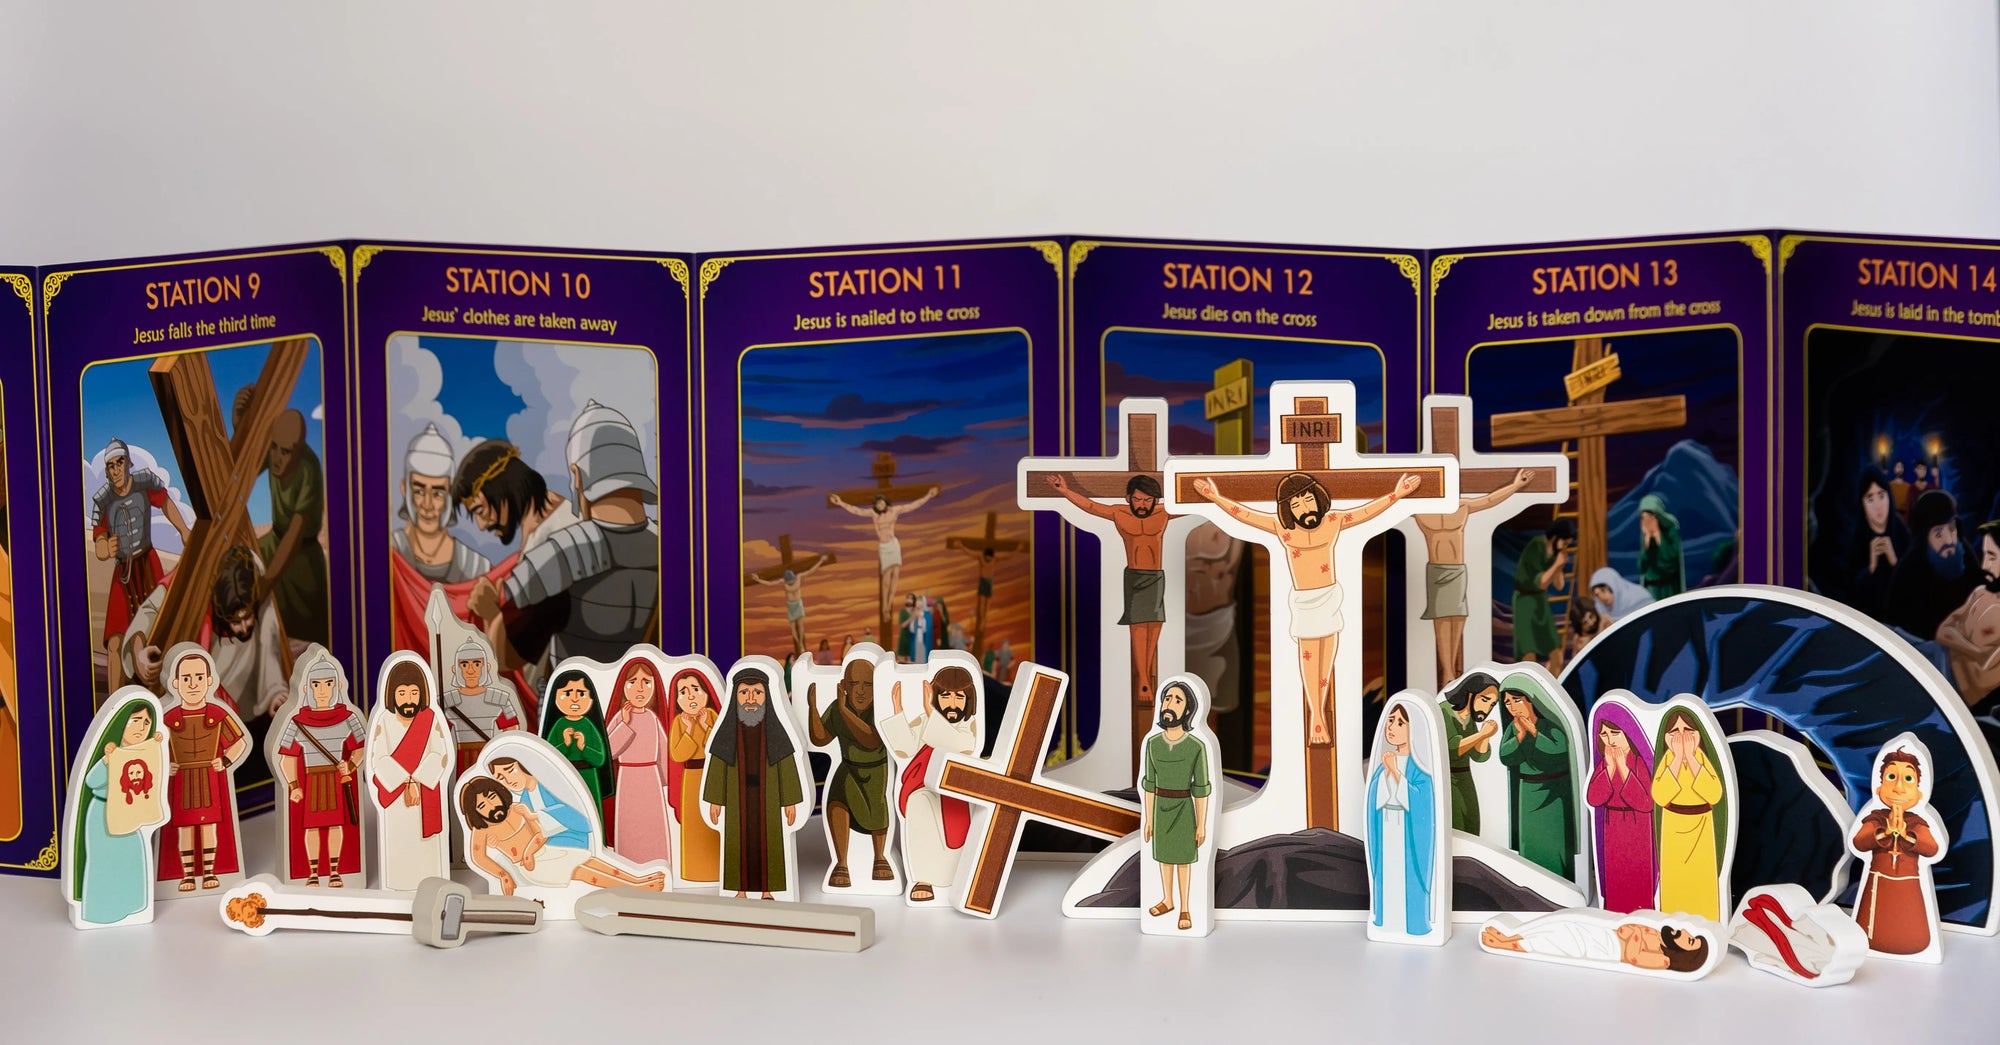 Three Tips for Making Stations of the Cross Work for Your Family